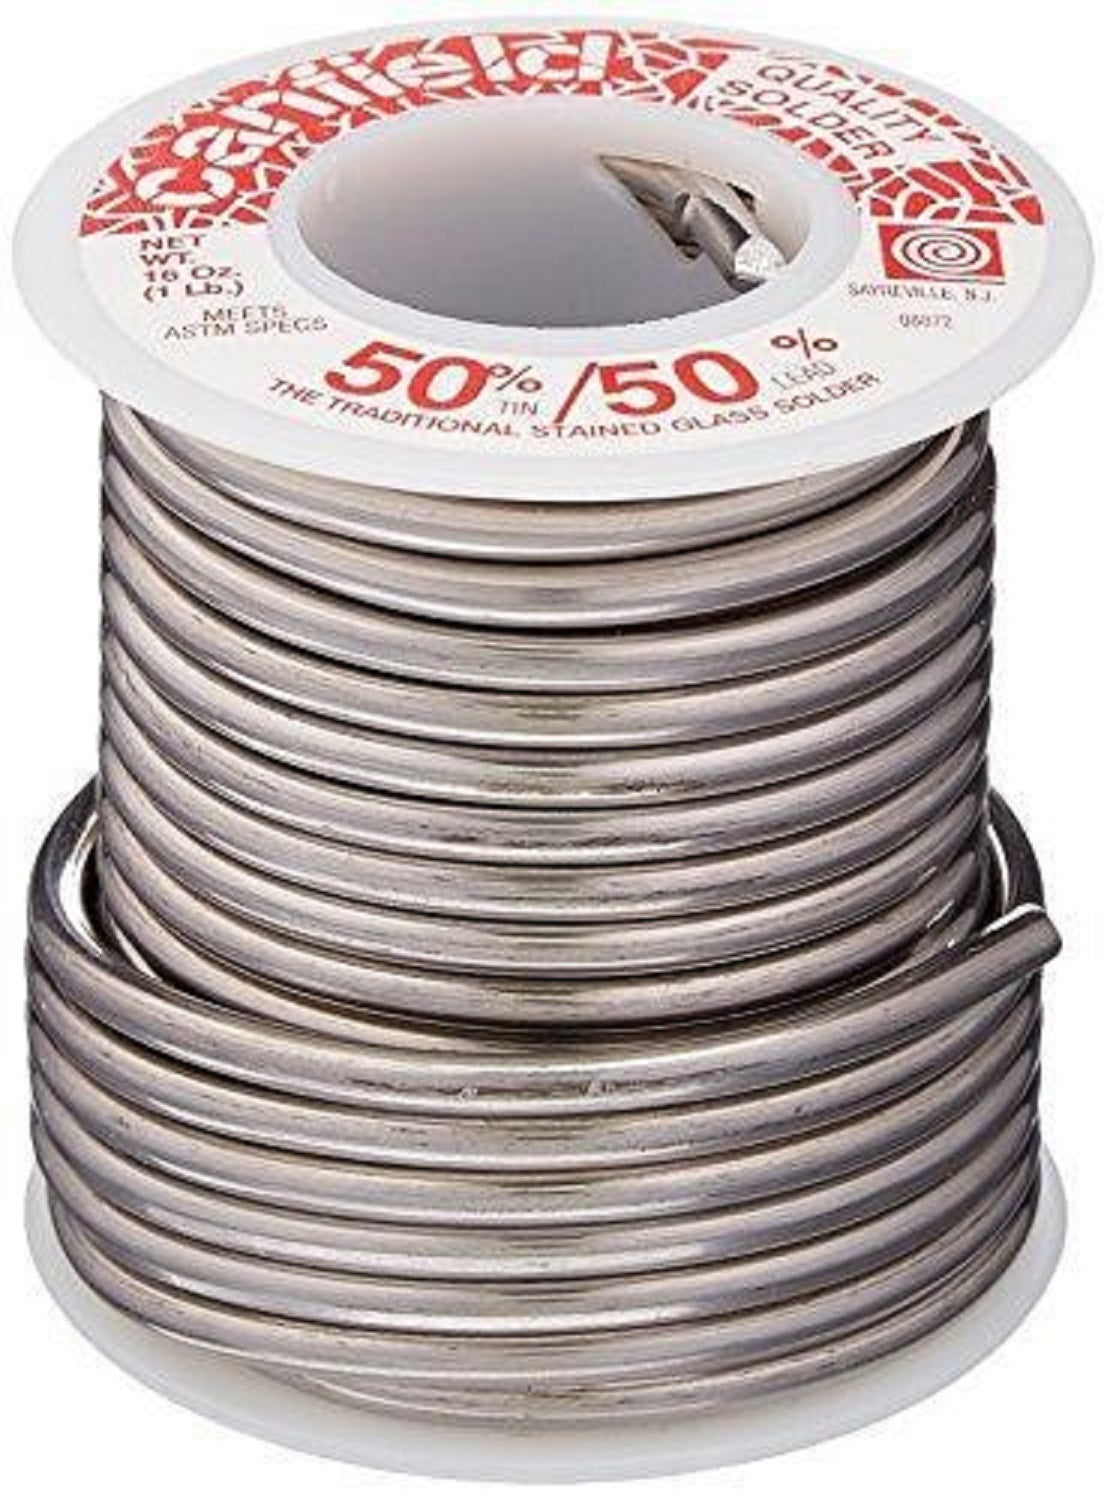 Canfield 50/50 Solder - 1 lb Roll